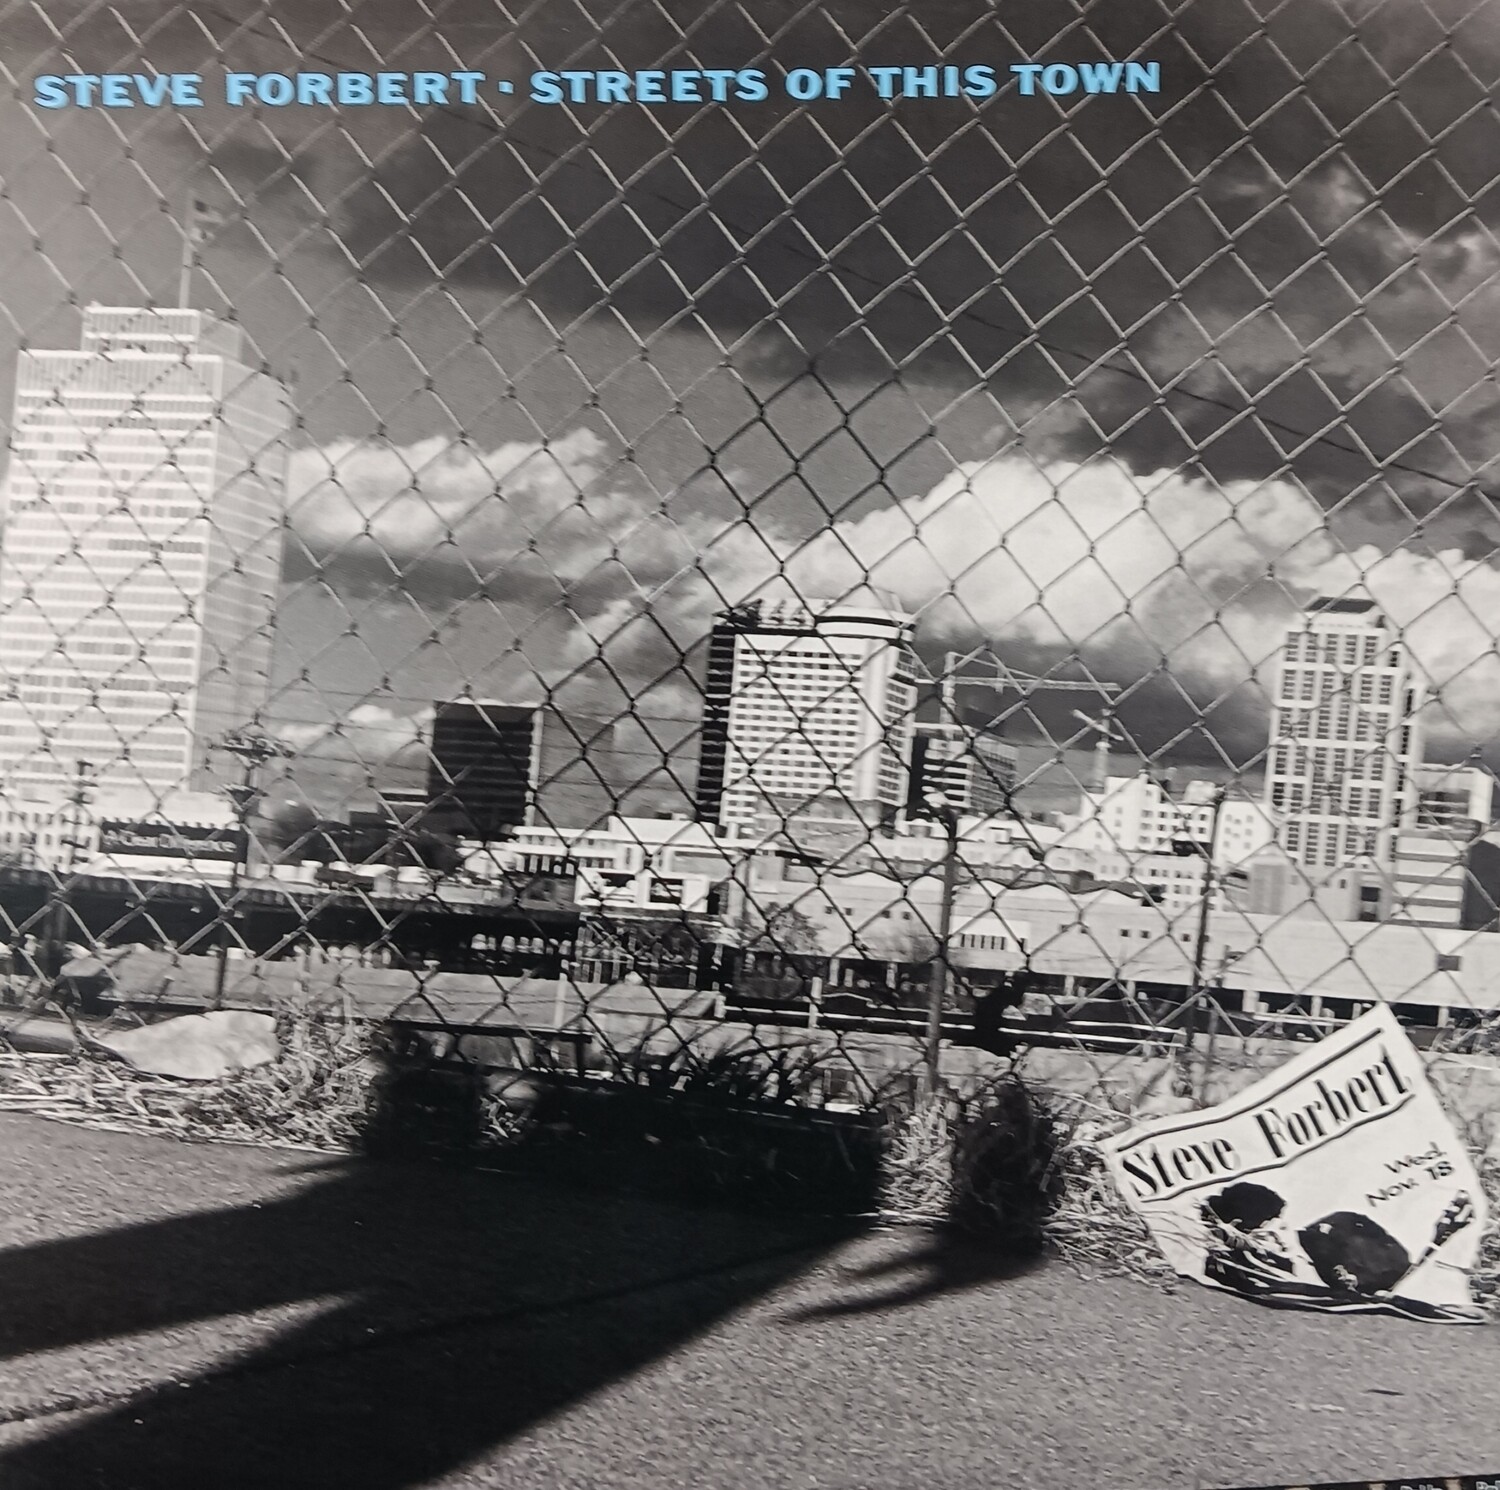 Steve Forbert - Streets of this town